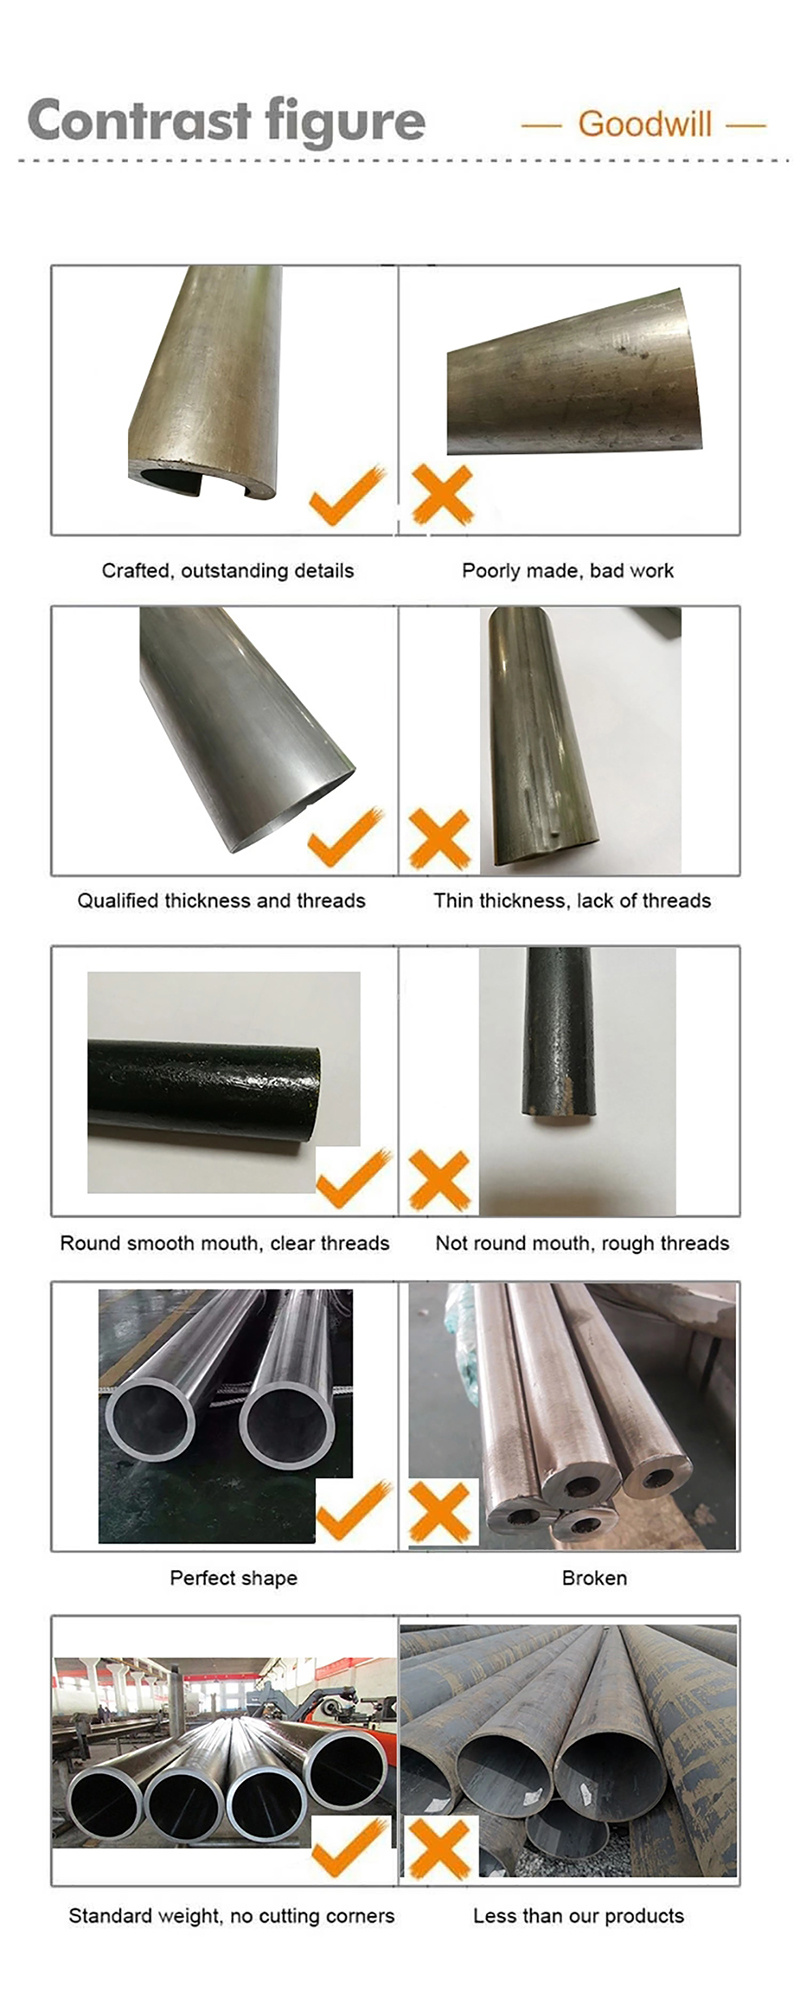 High-Quality Seamless Steel Pipes for Customized Oil and Gas Pipelines